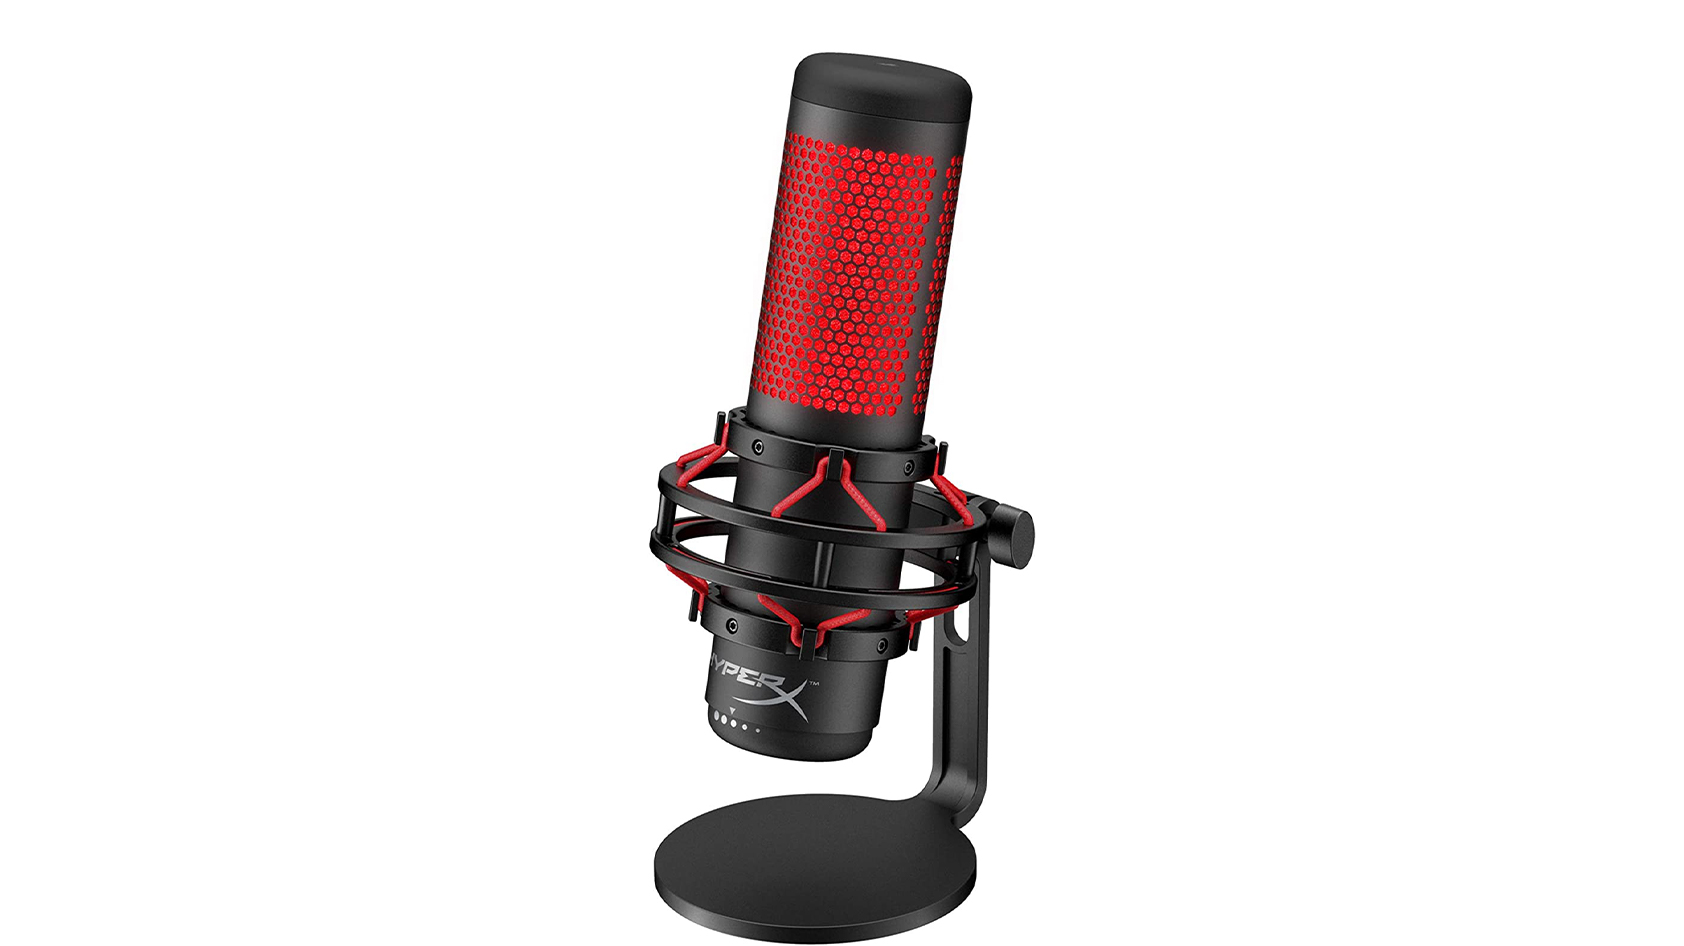 The HyperX QuadCast gaming microphone against a white background.